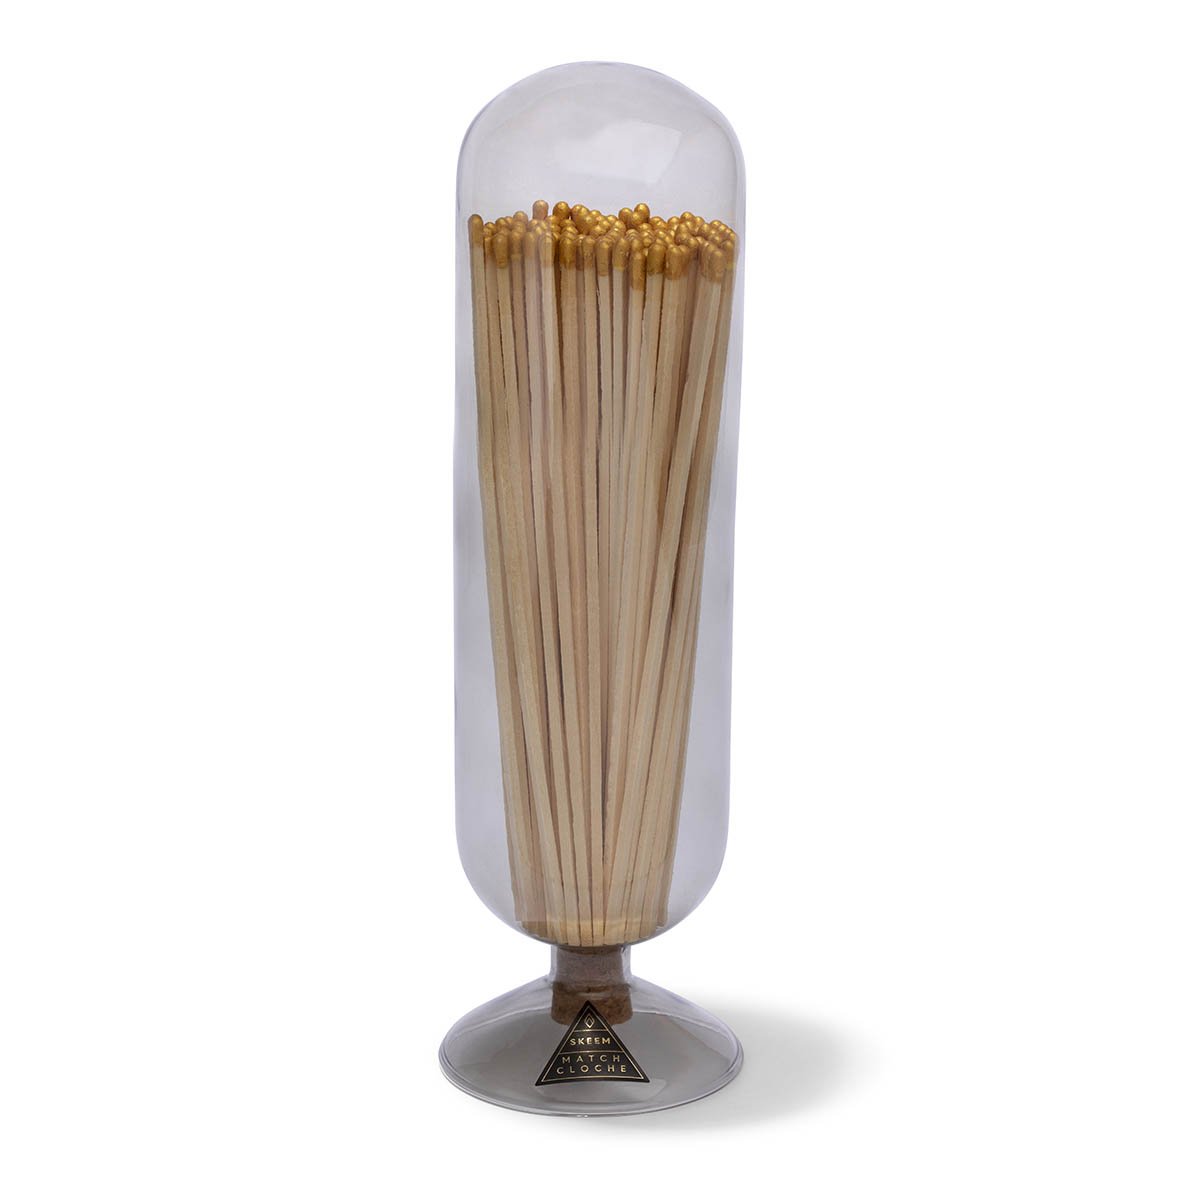 smoke fireplace match cloche with gold-tipped matches - KISS AND MAKEUP